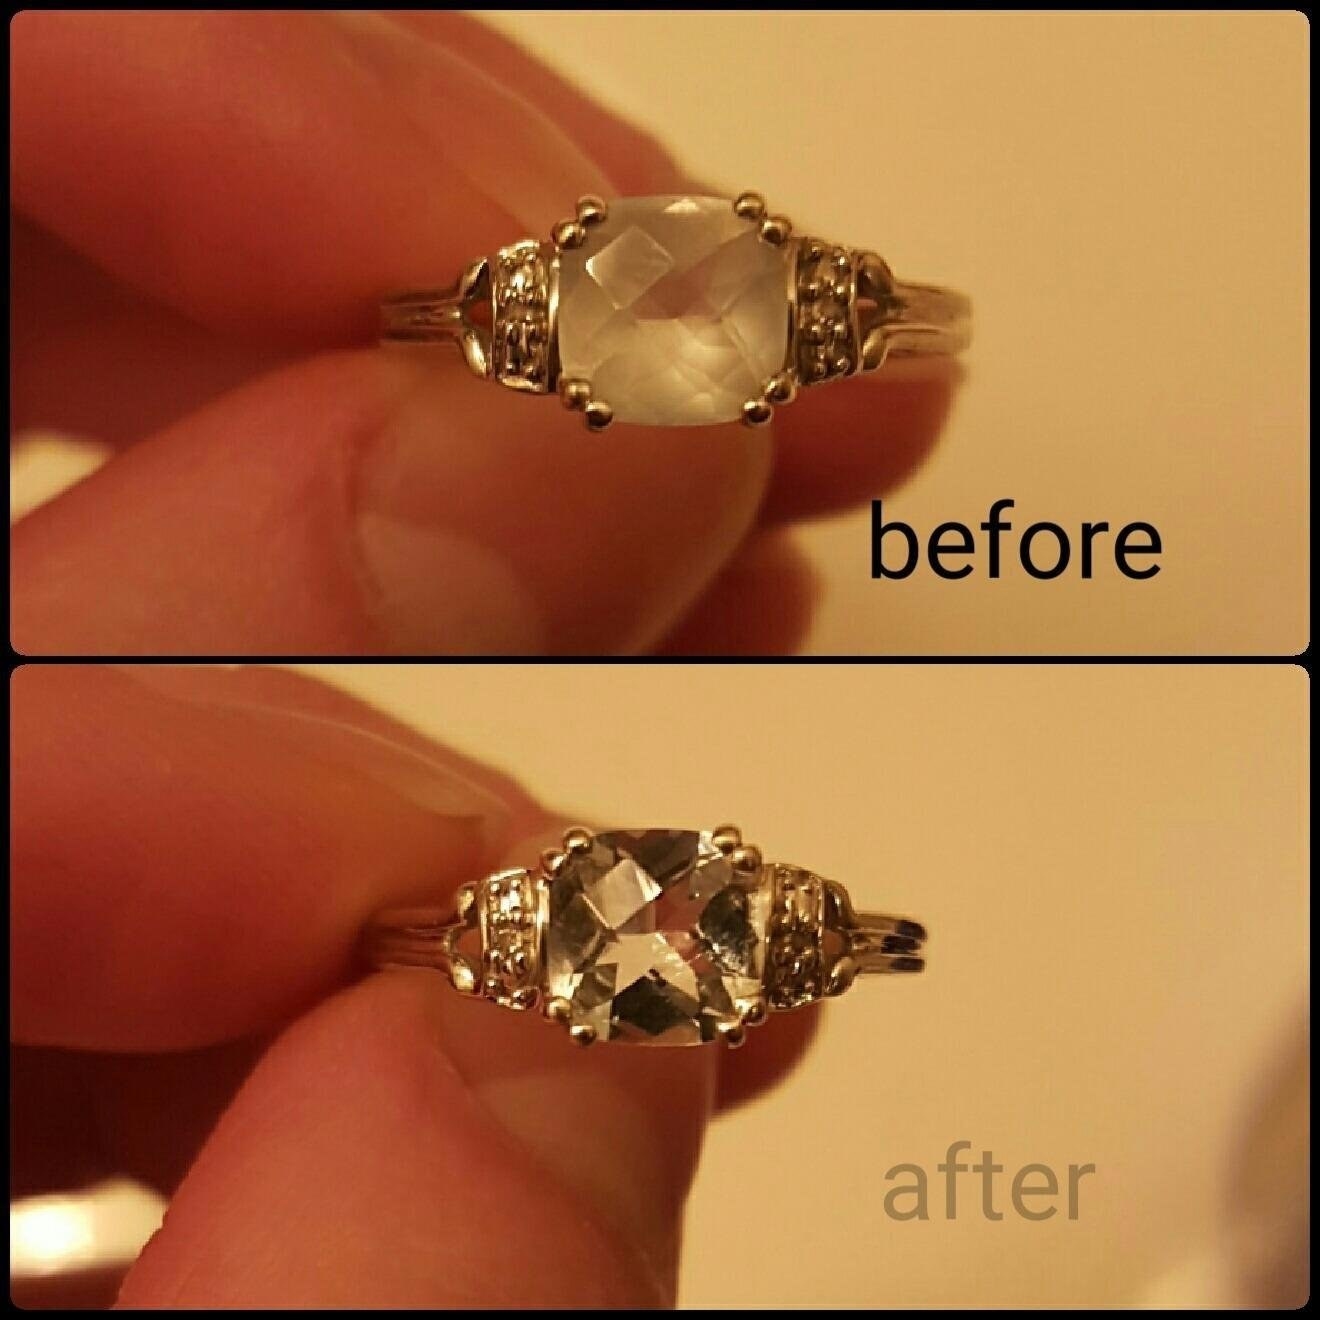 Reviewer photo of before and after using the jewelry cleaner on diamond ring